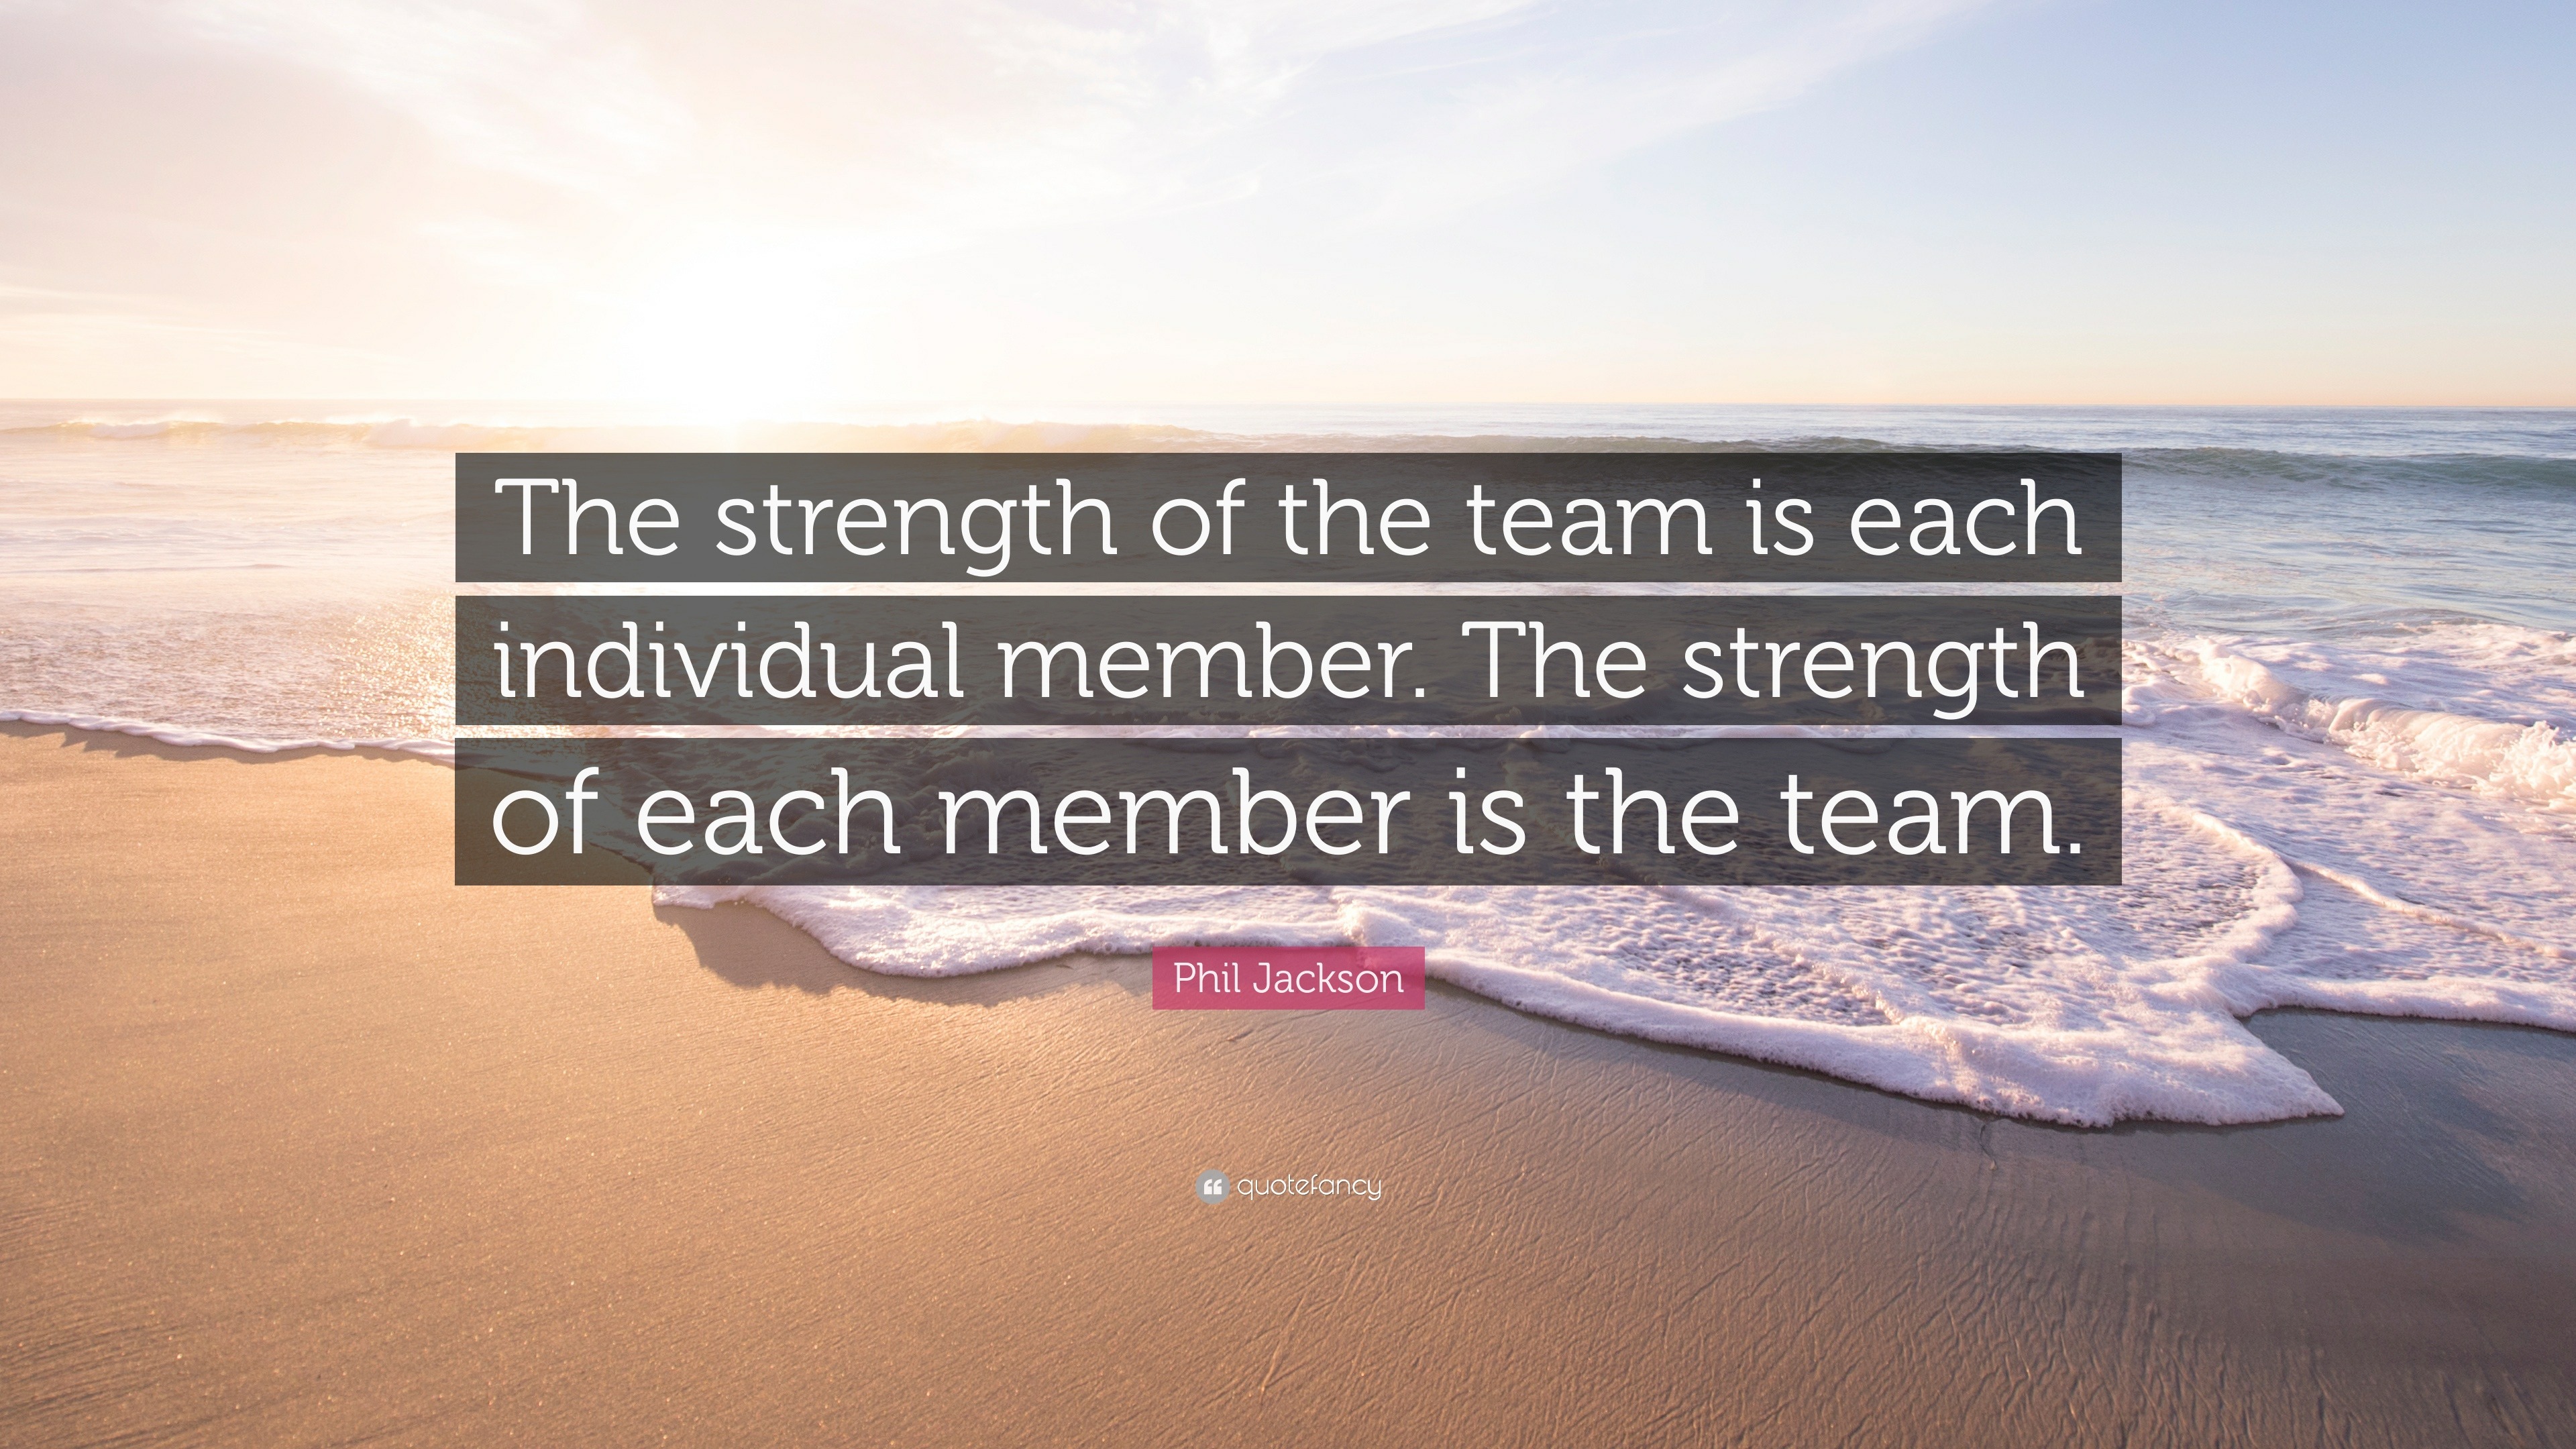 Phil Jackson Quote: “The strength of the team is each individual member